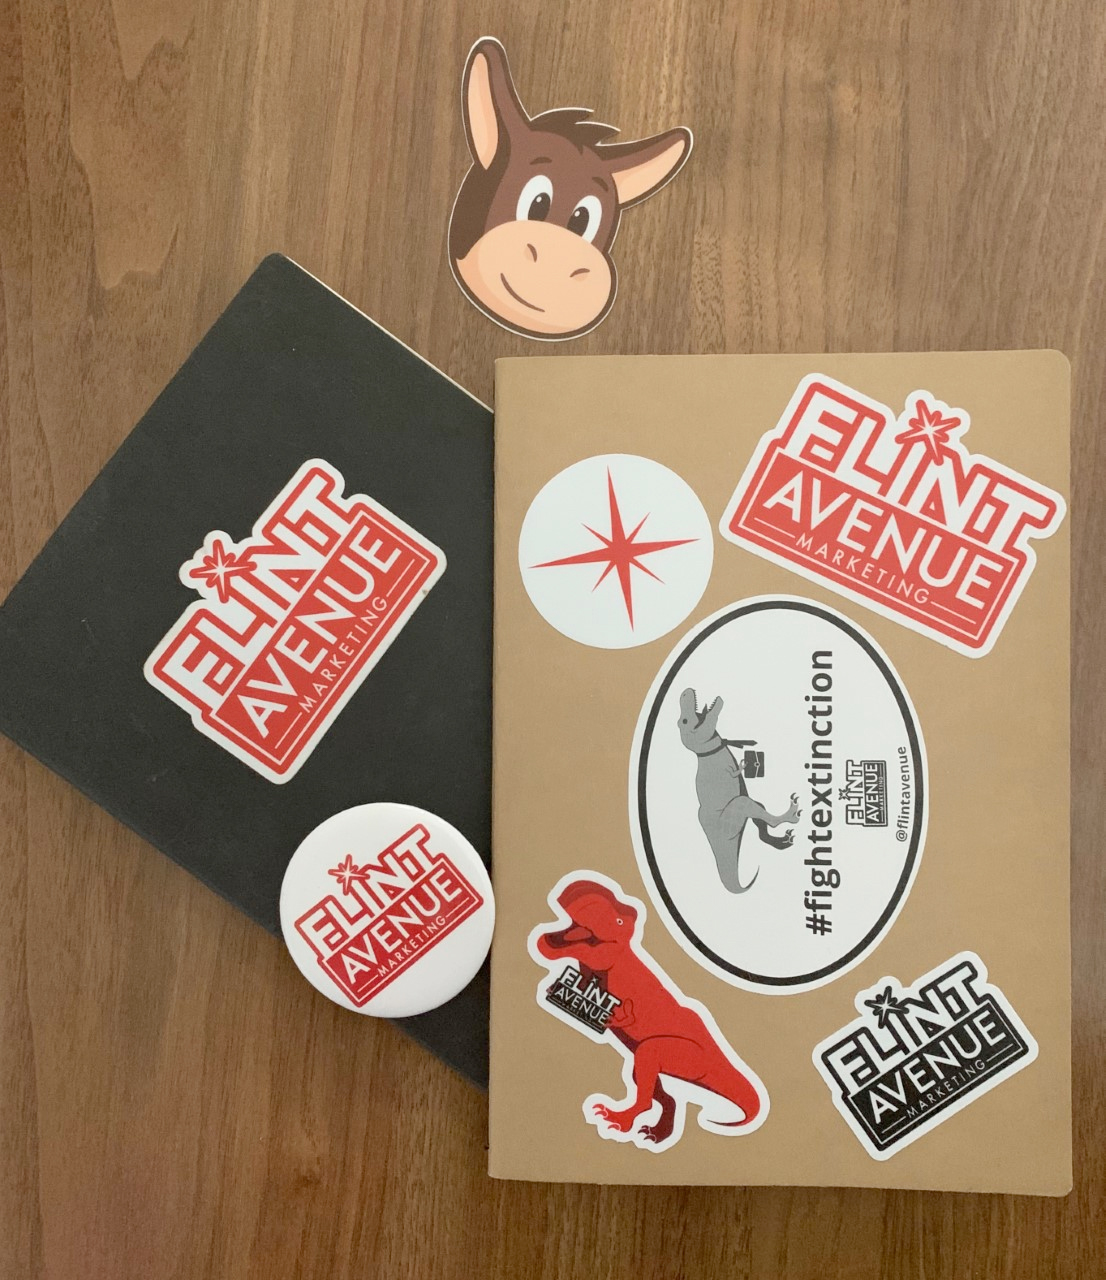 FAM stickers ordered from stickermule